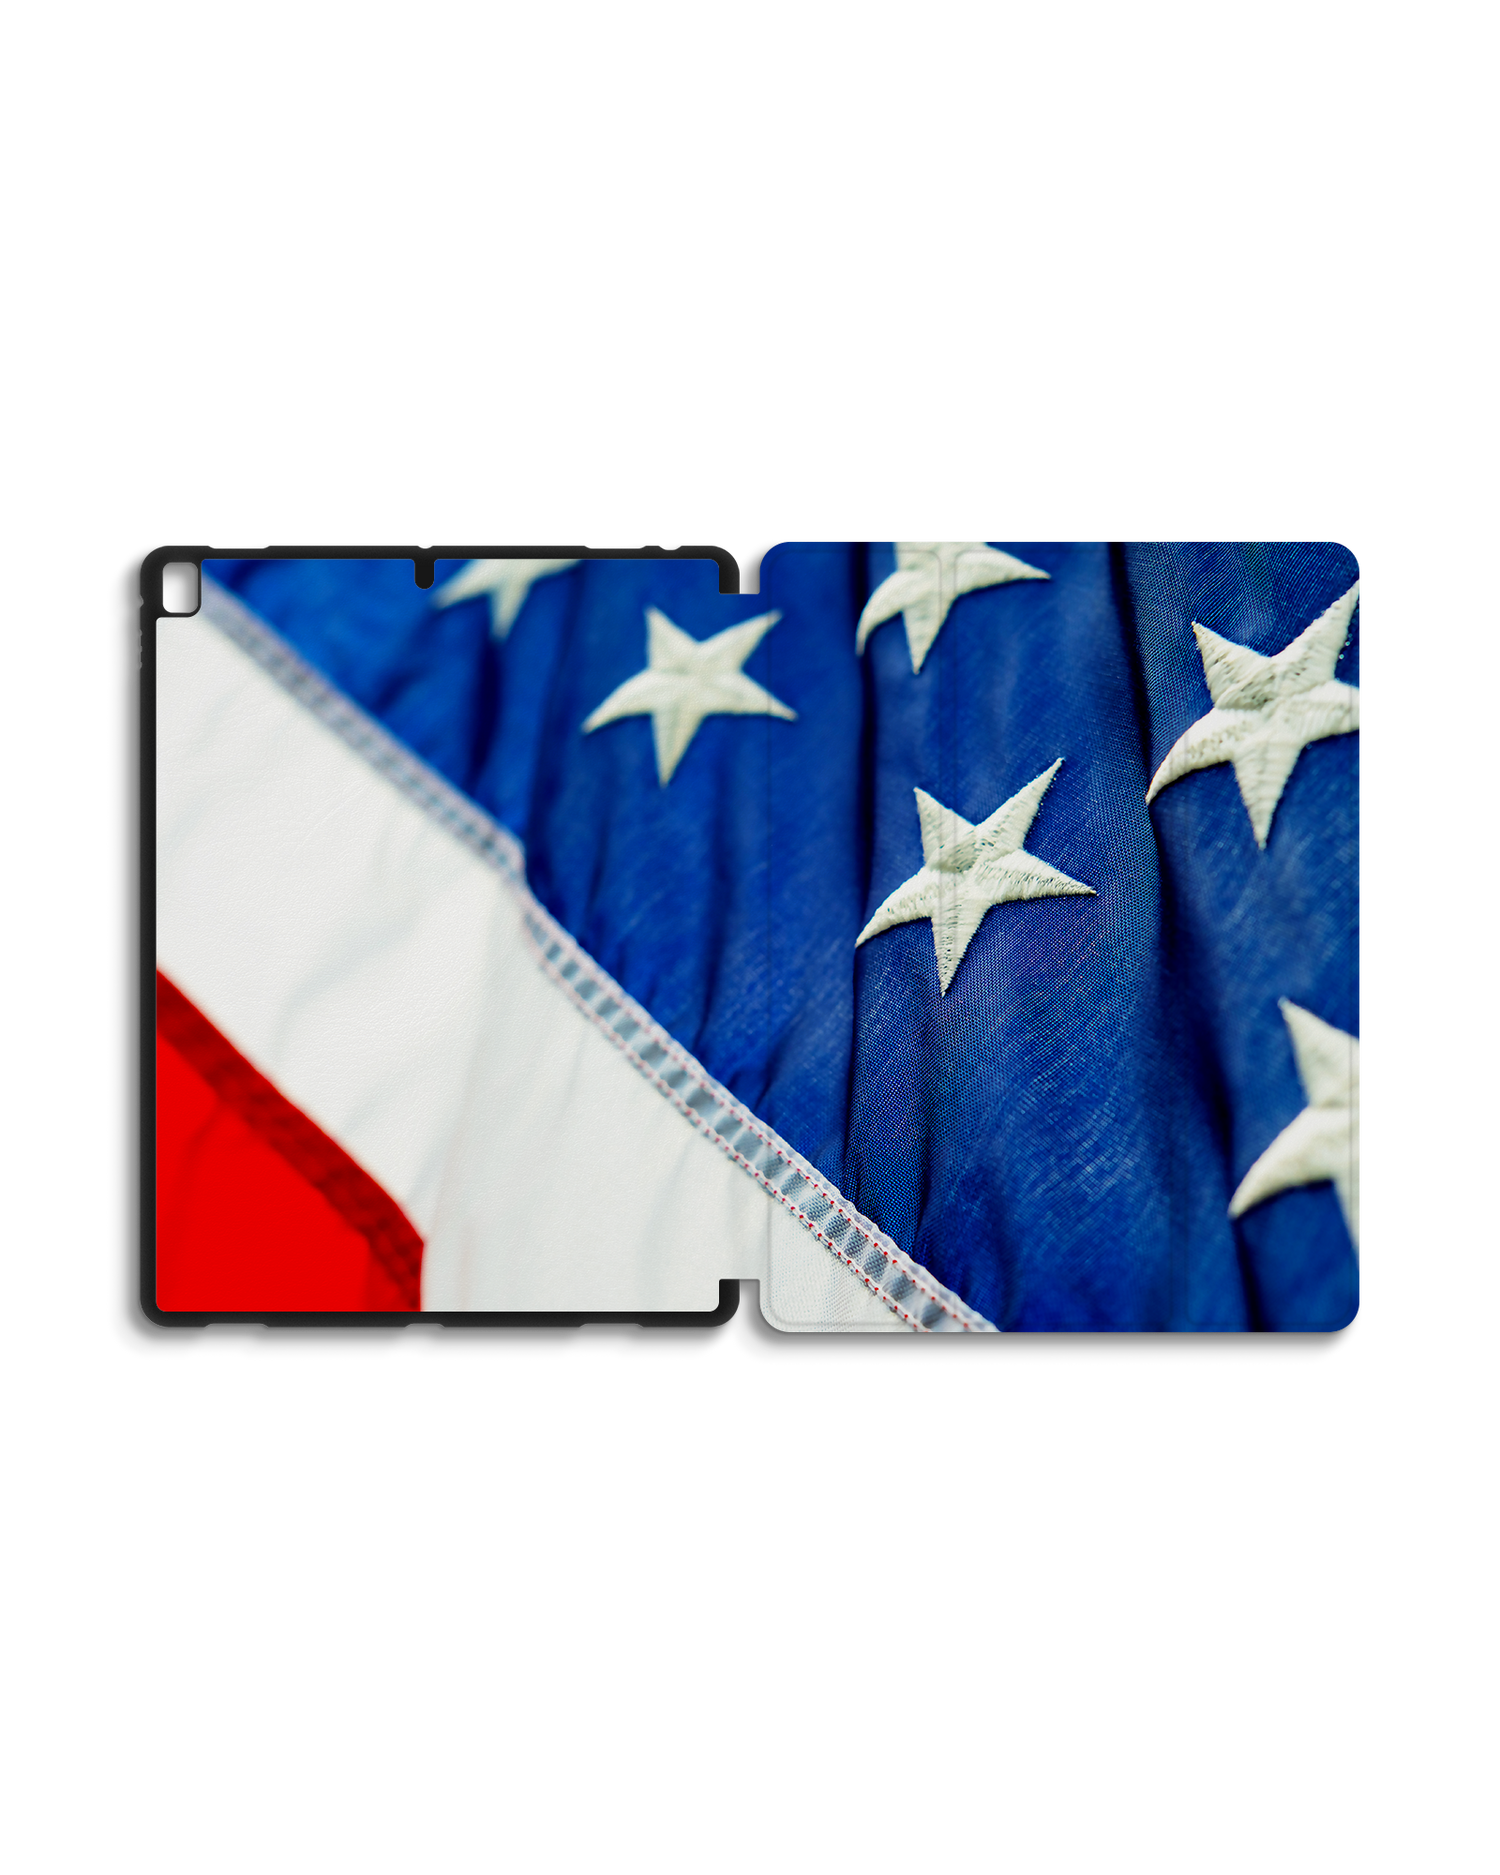 Stars And Stripes iPad Case with Pencil Holder for Apple iPad Pro 2 12.9